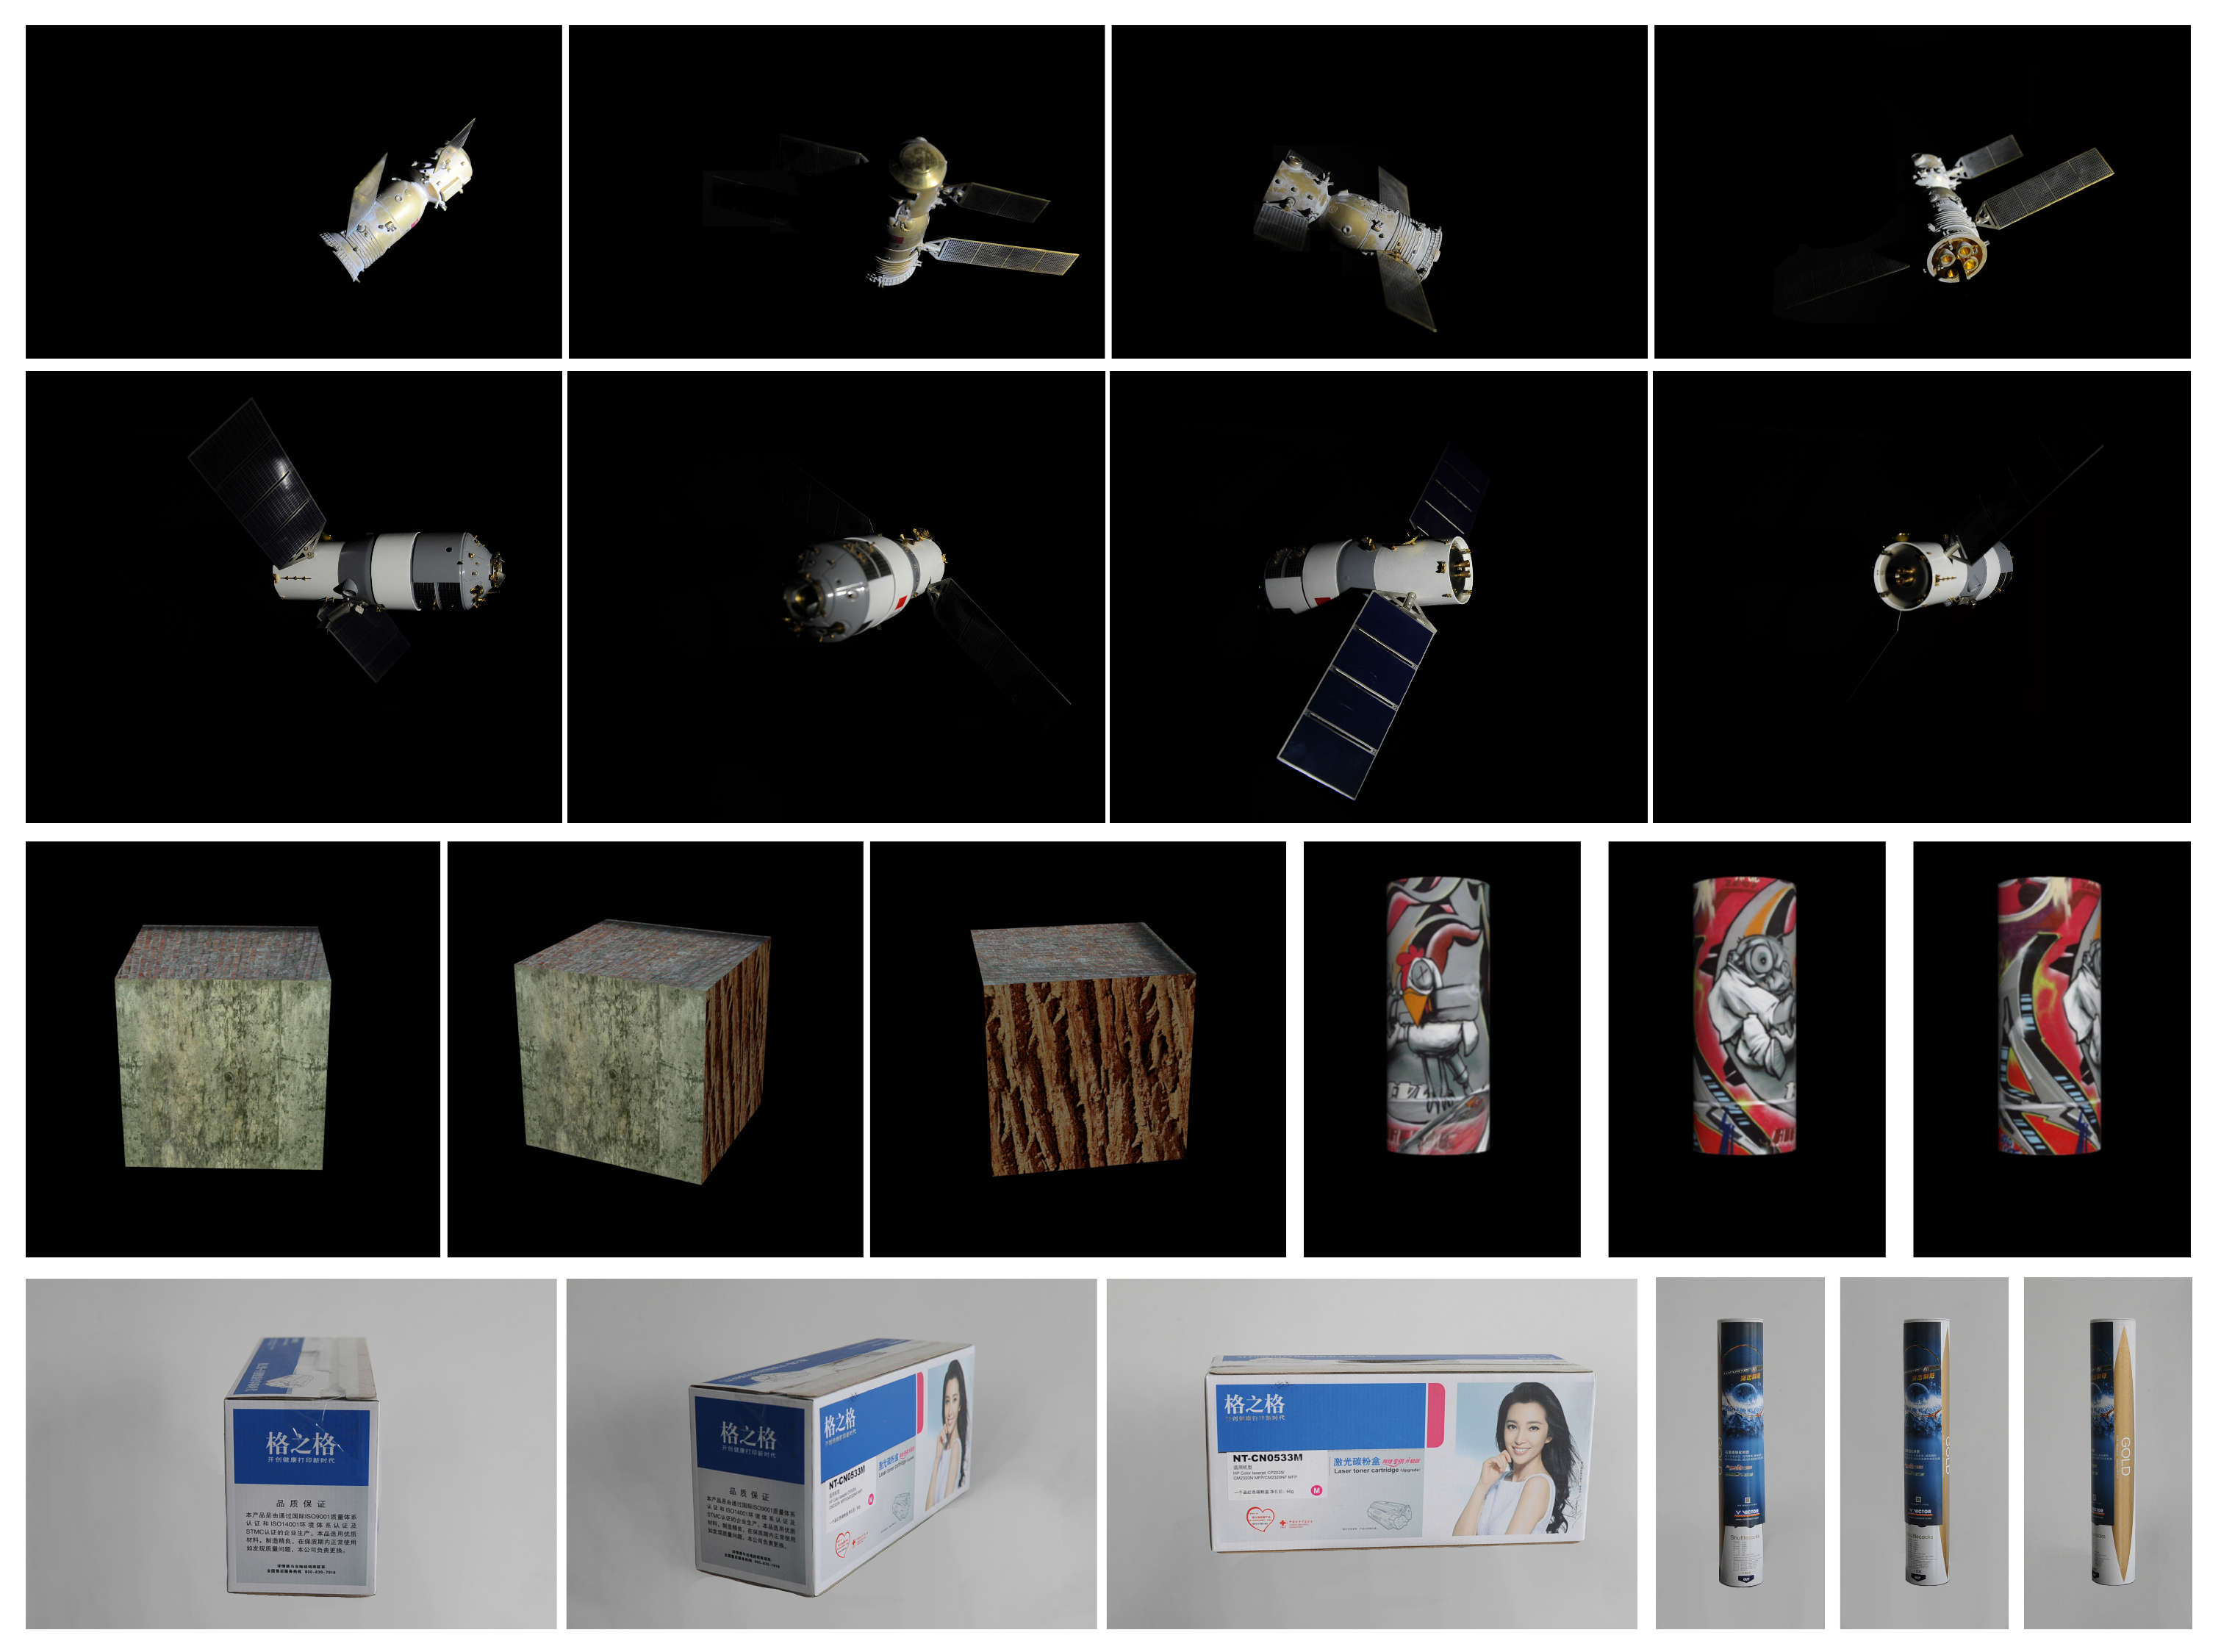 Sensors Free Full Text 3d Reconstruction Of Space Objects From Multi Views By A Visible Sensor Html